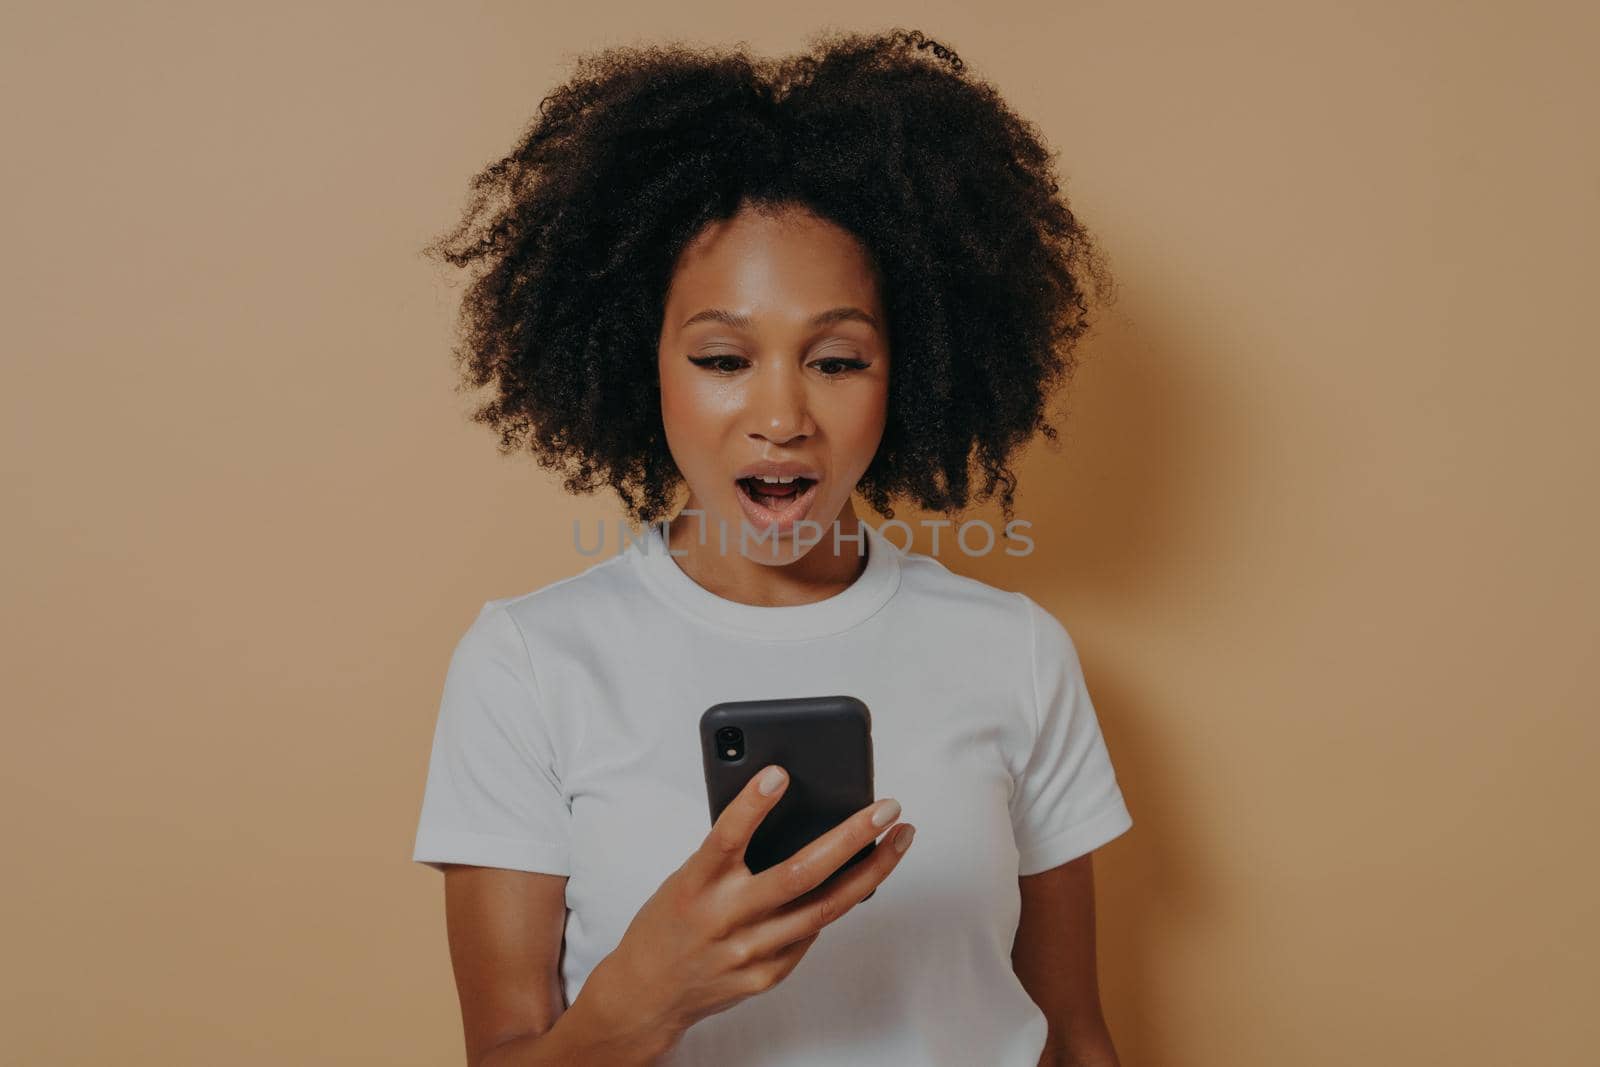 Surprised african female looking at smartphone with shocked face expression on beige background by vkstock